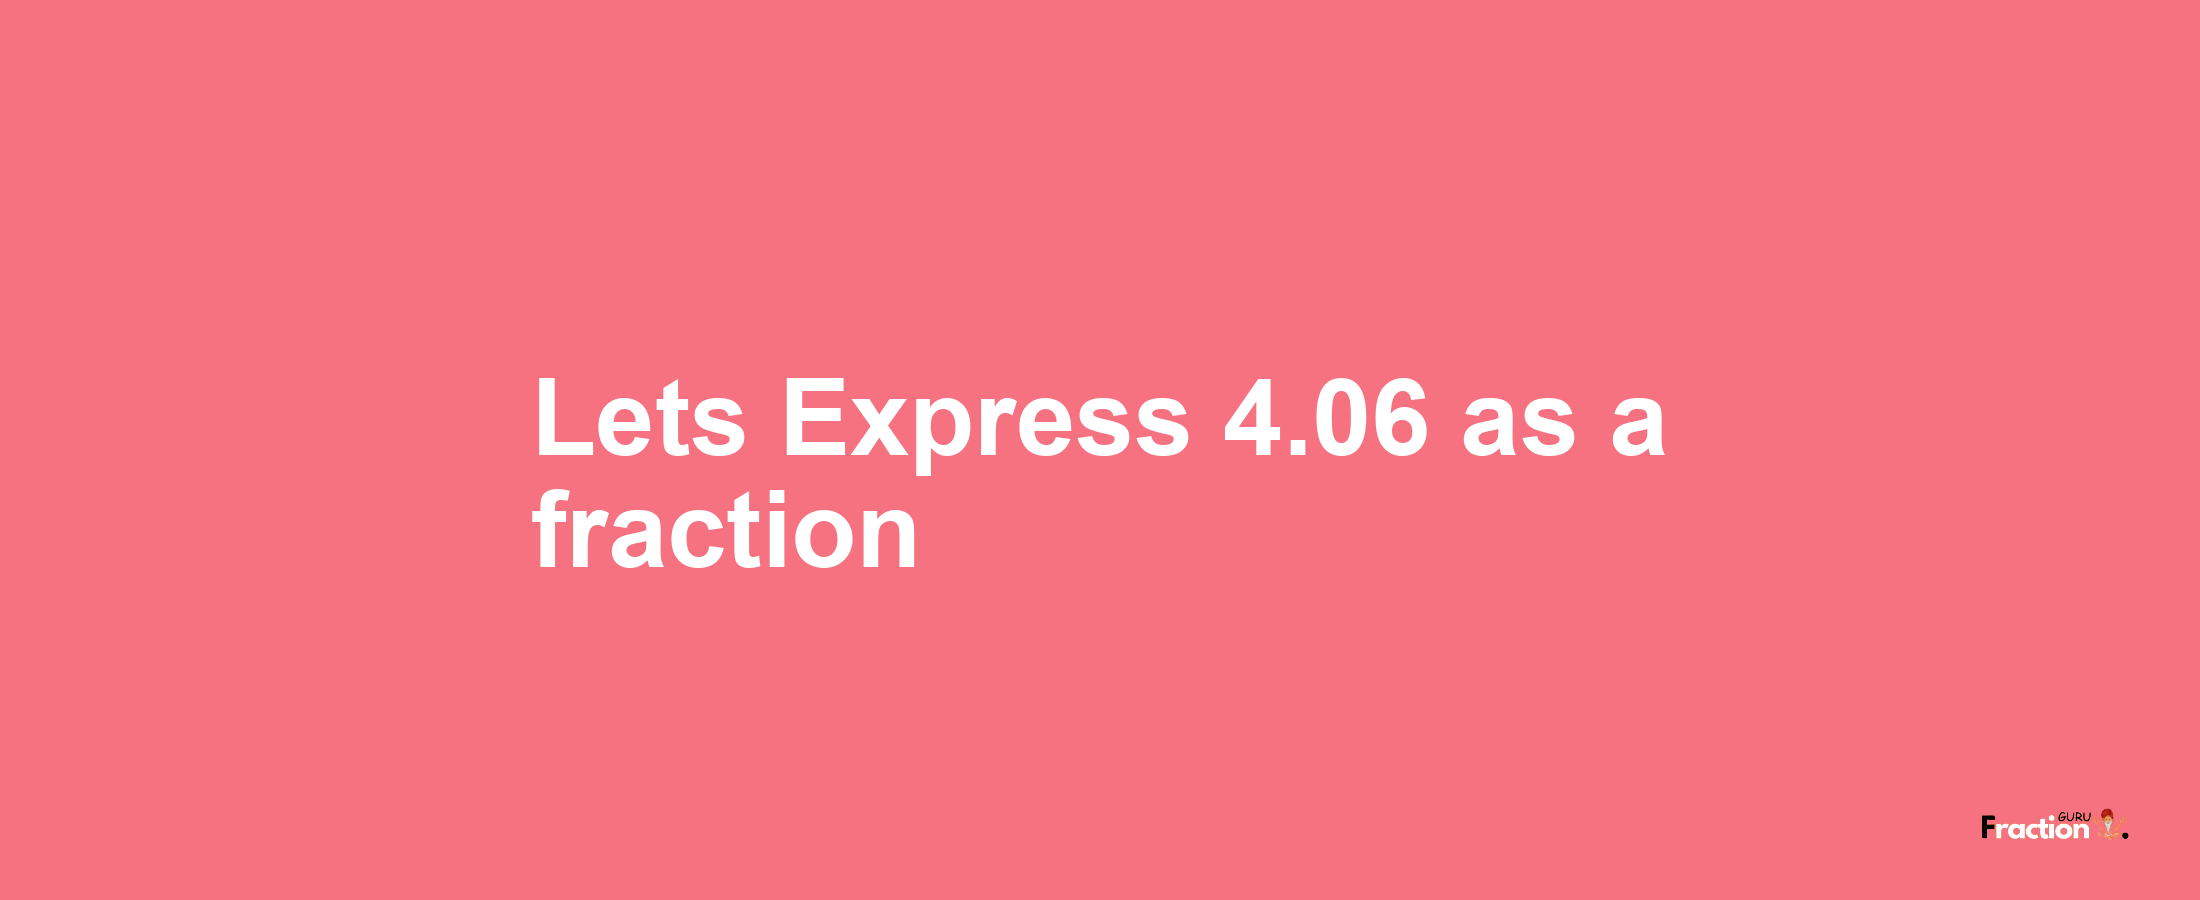 Lets Express 4.06 as afraction